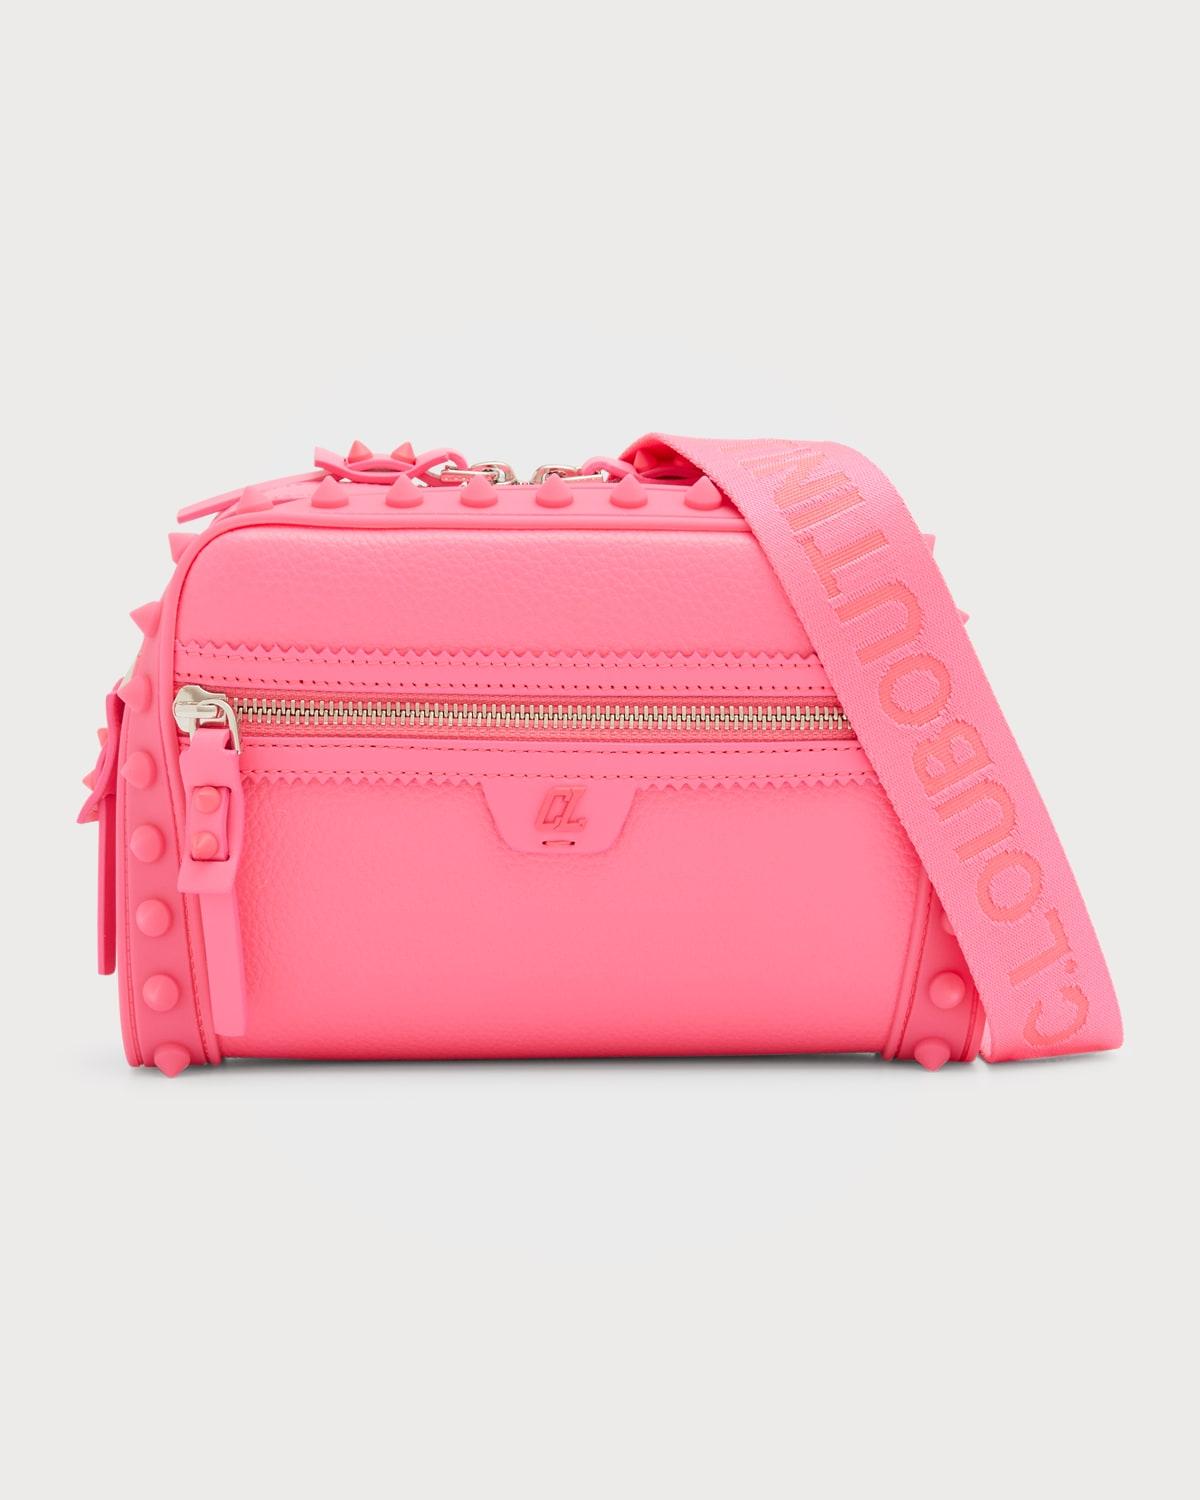 Christian Louboutin Spike Leather Crossbody Bag in Pink |